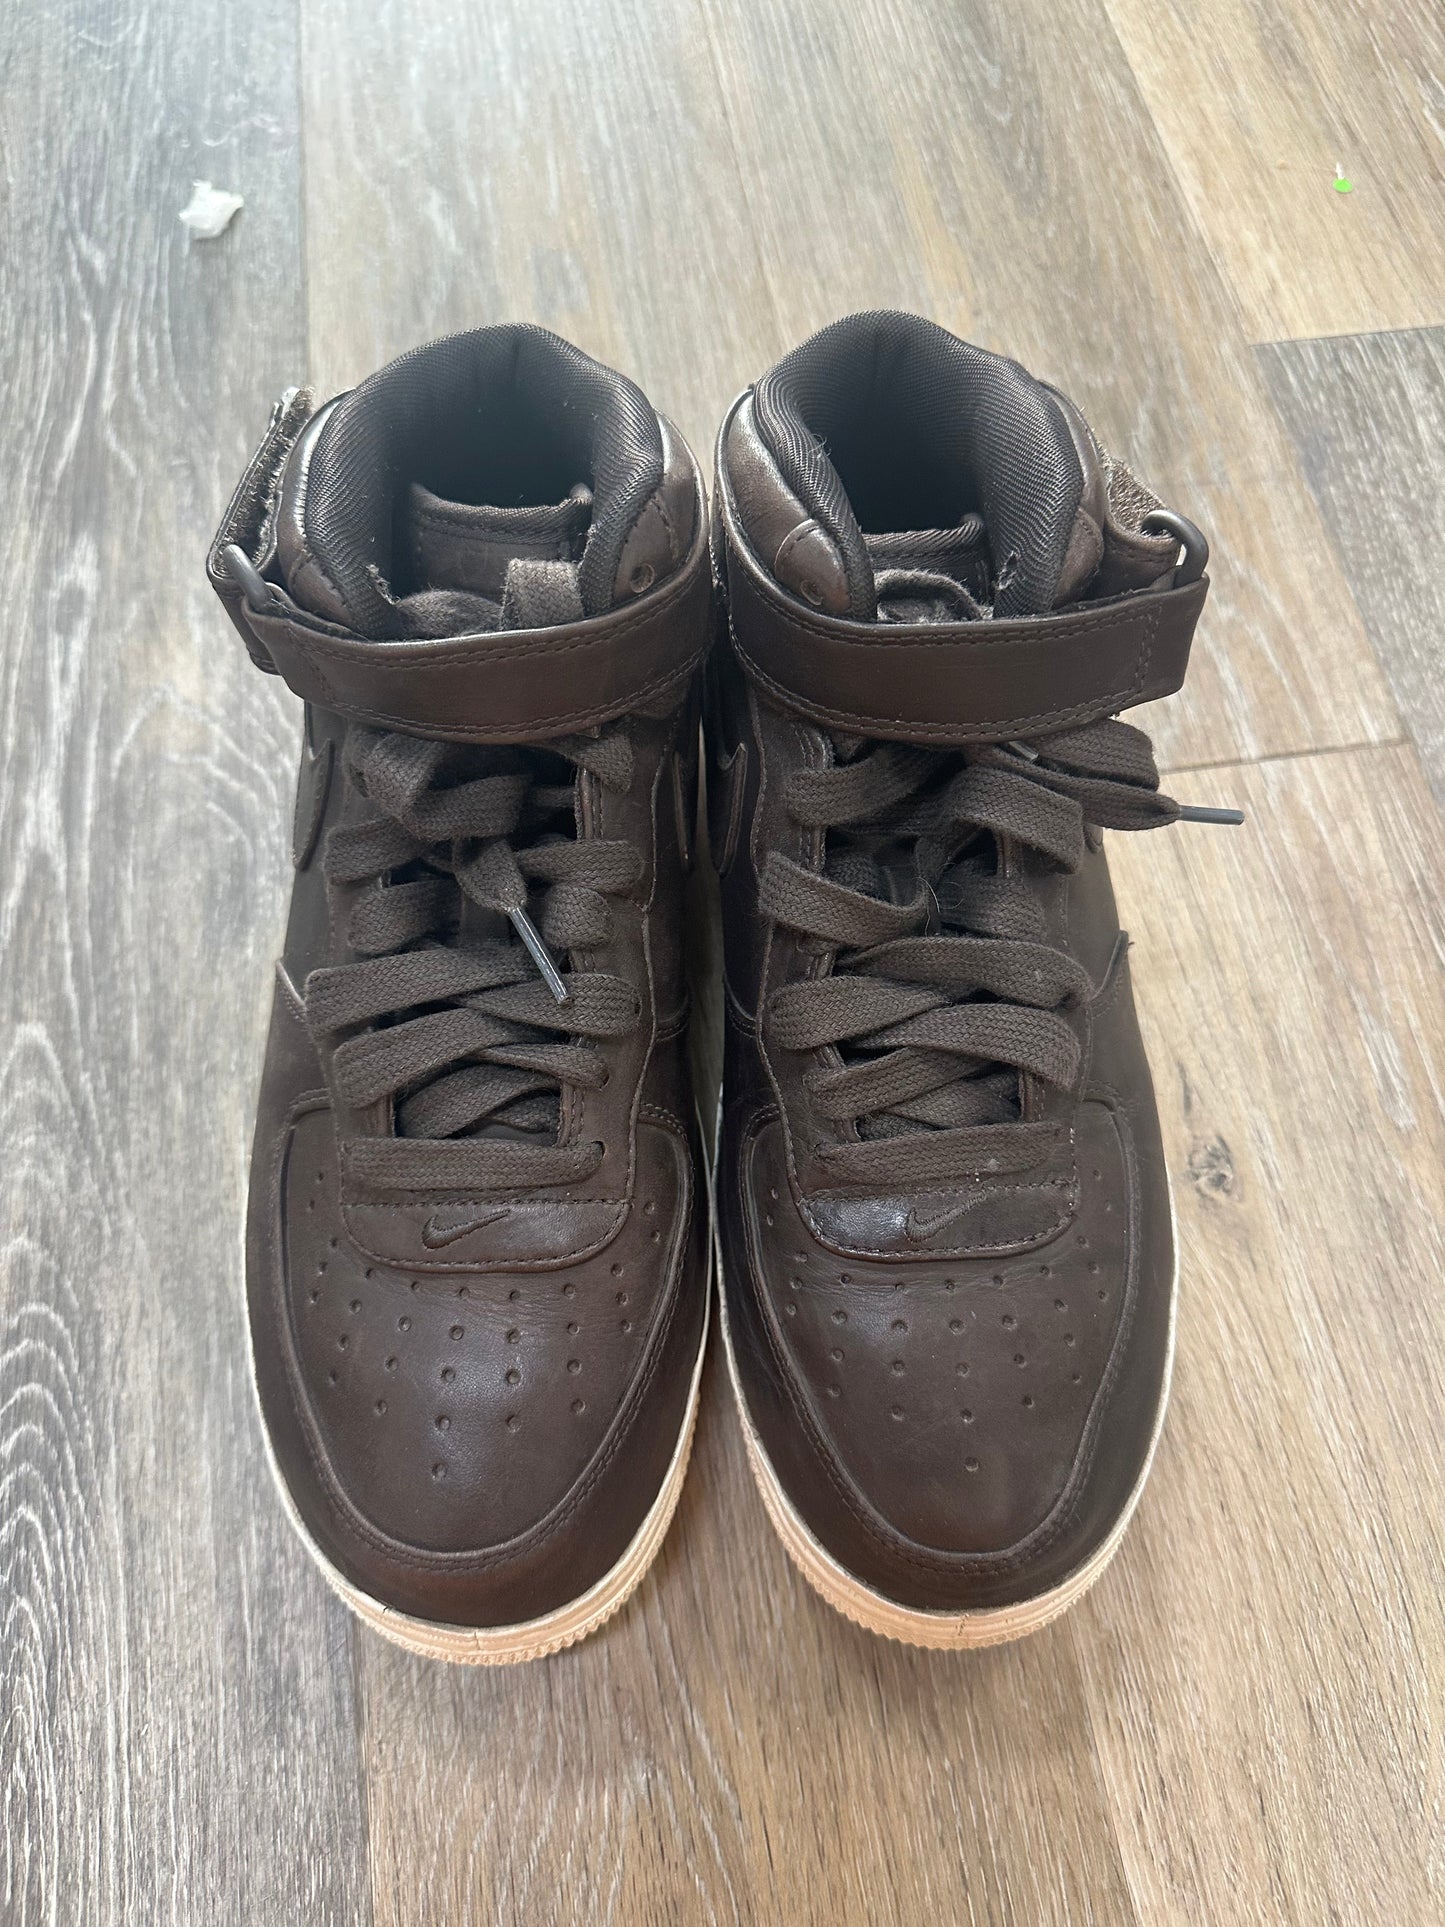 Brown Shoes Athletic Nike, Size 7.5